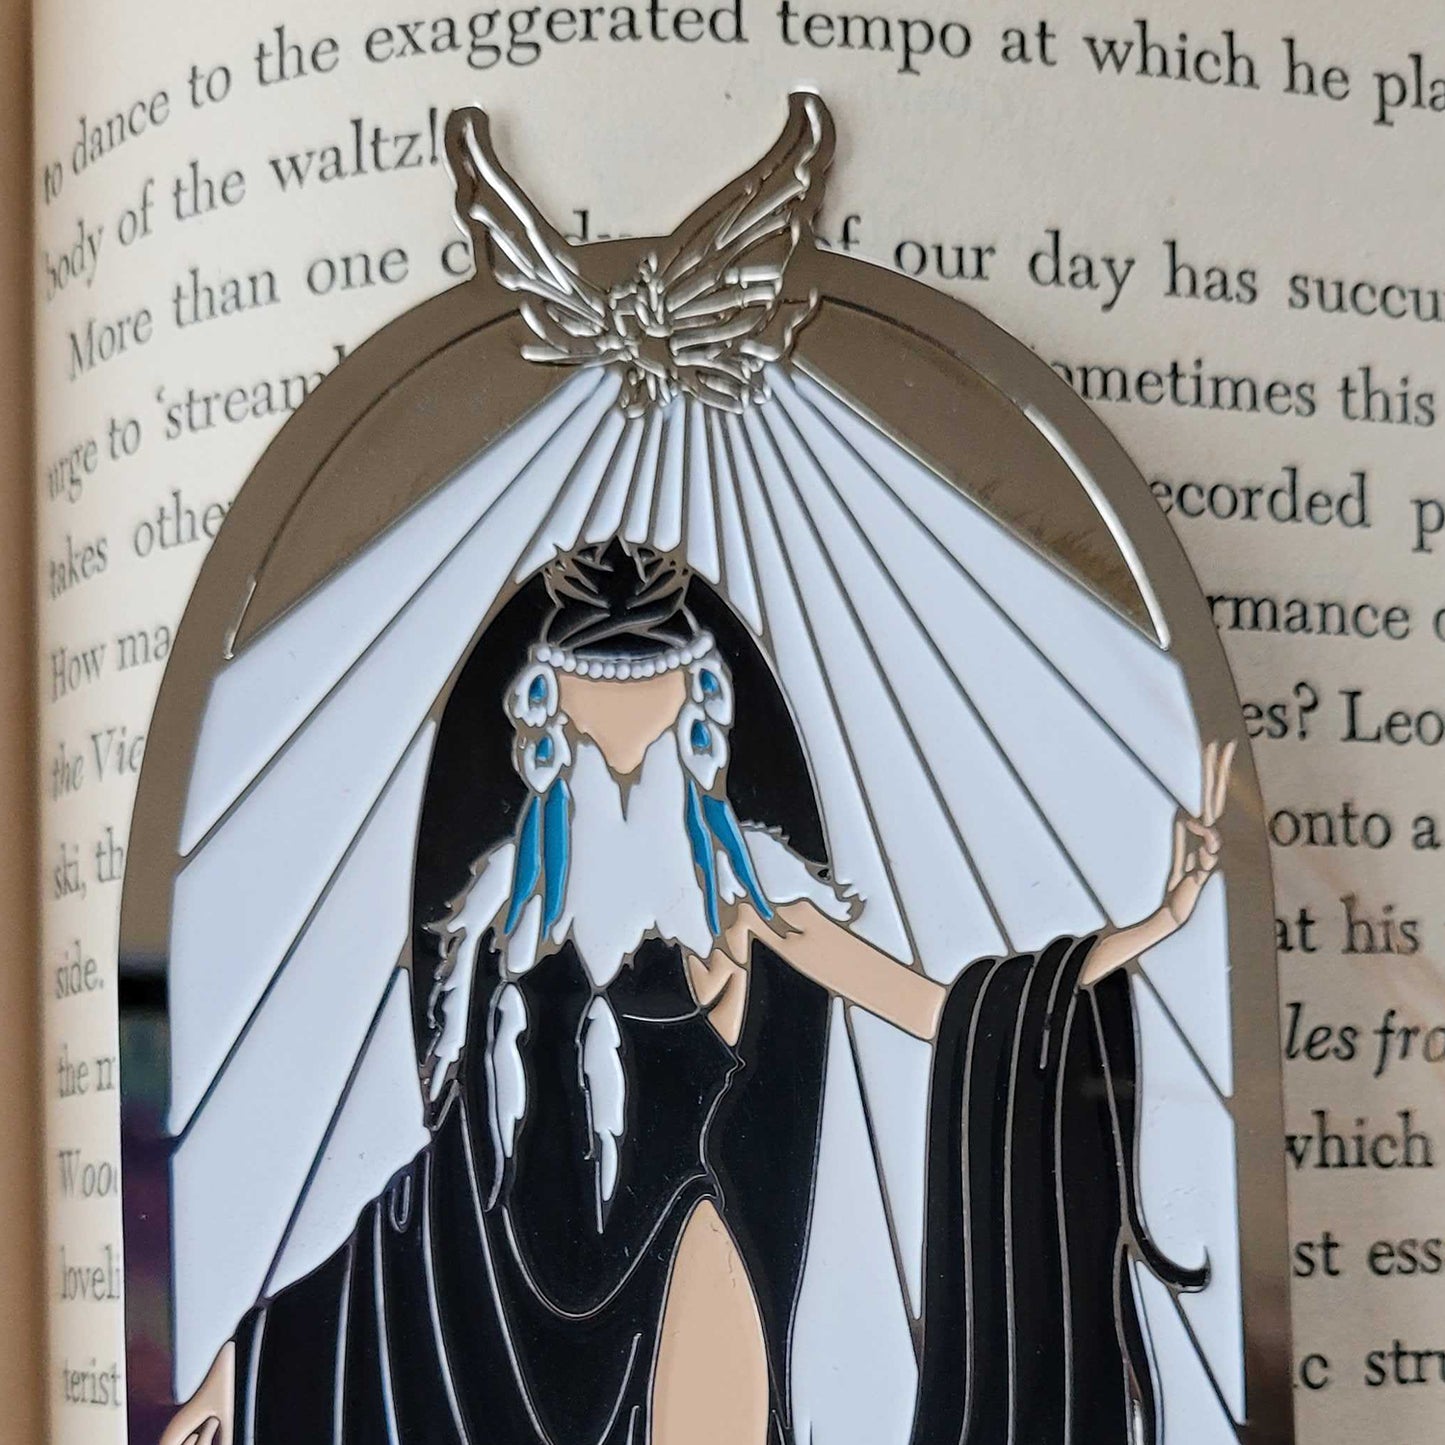 Close up view of a bookmark on the pages of a hardcover book. The bookmark depicts the ElfQuest character Winnowill, dressed in black robes with white rays above her